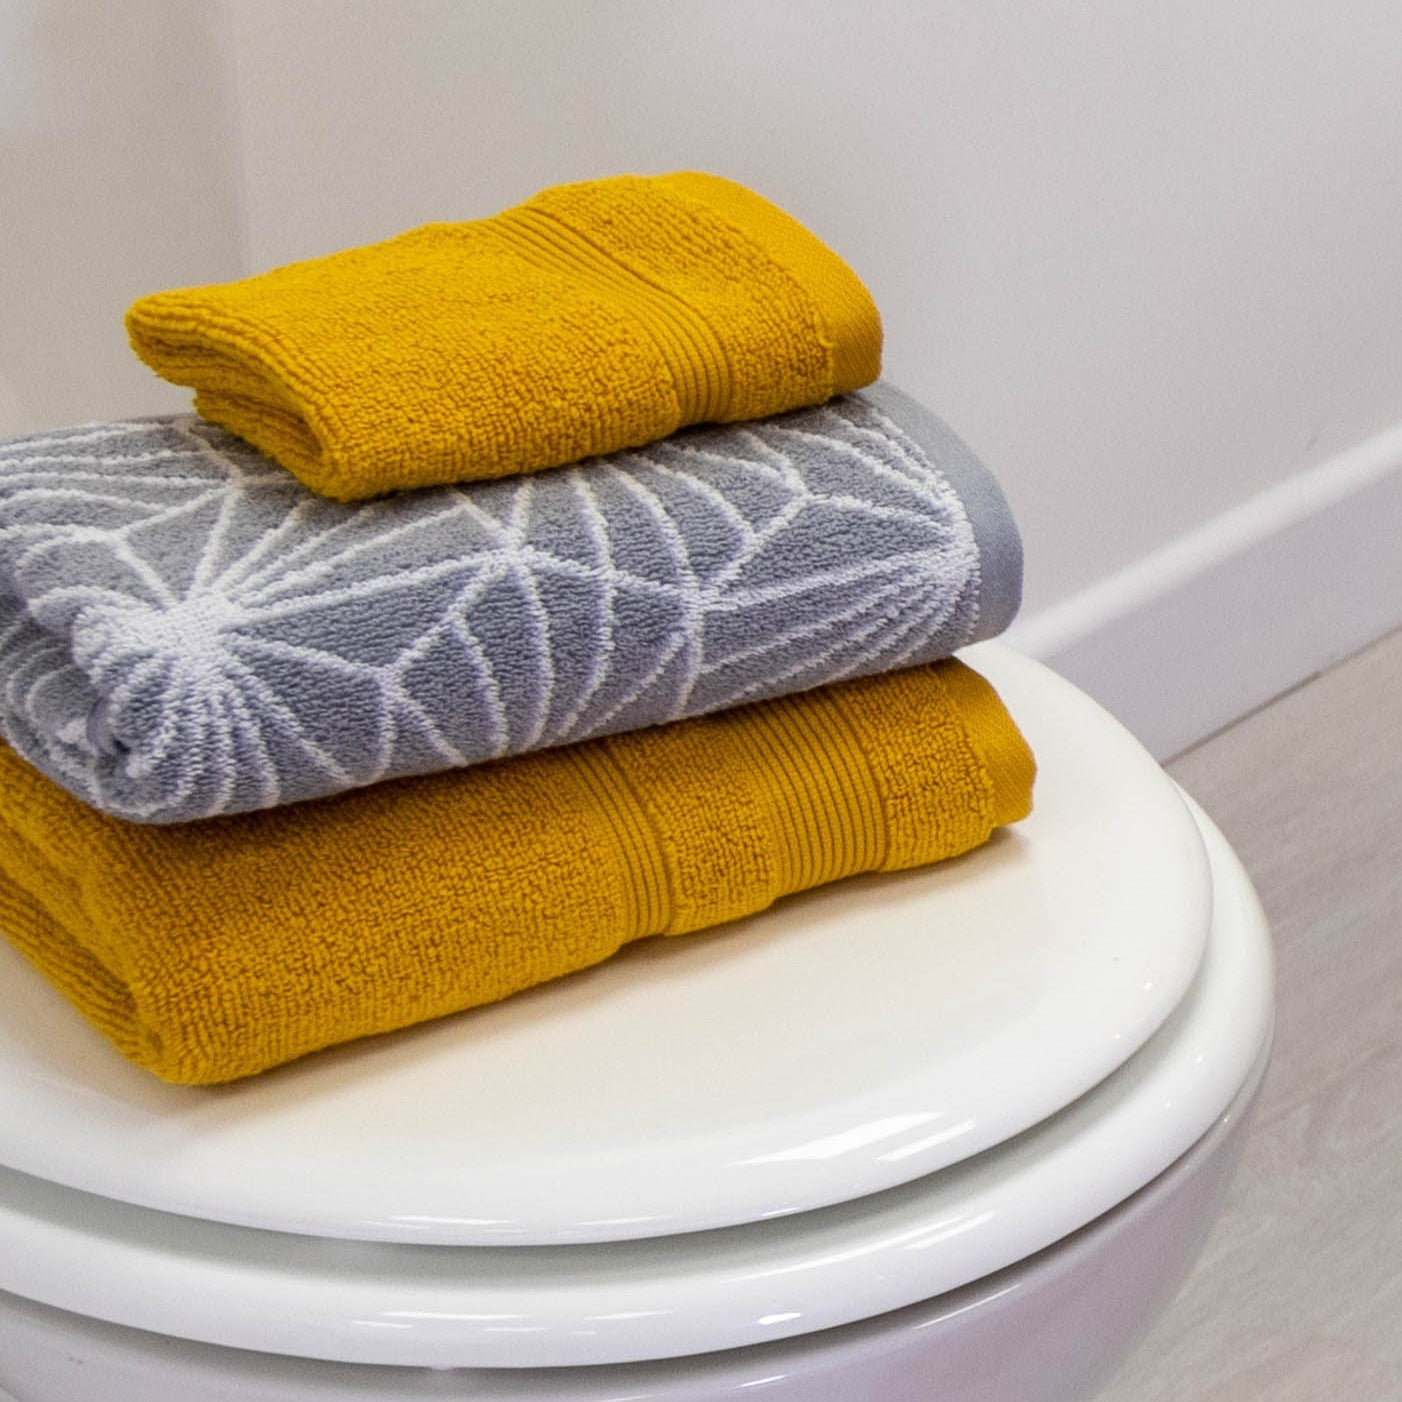 New in  Towels, Mats and Throws For The Home – Allure Bath Fashions